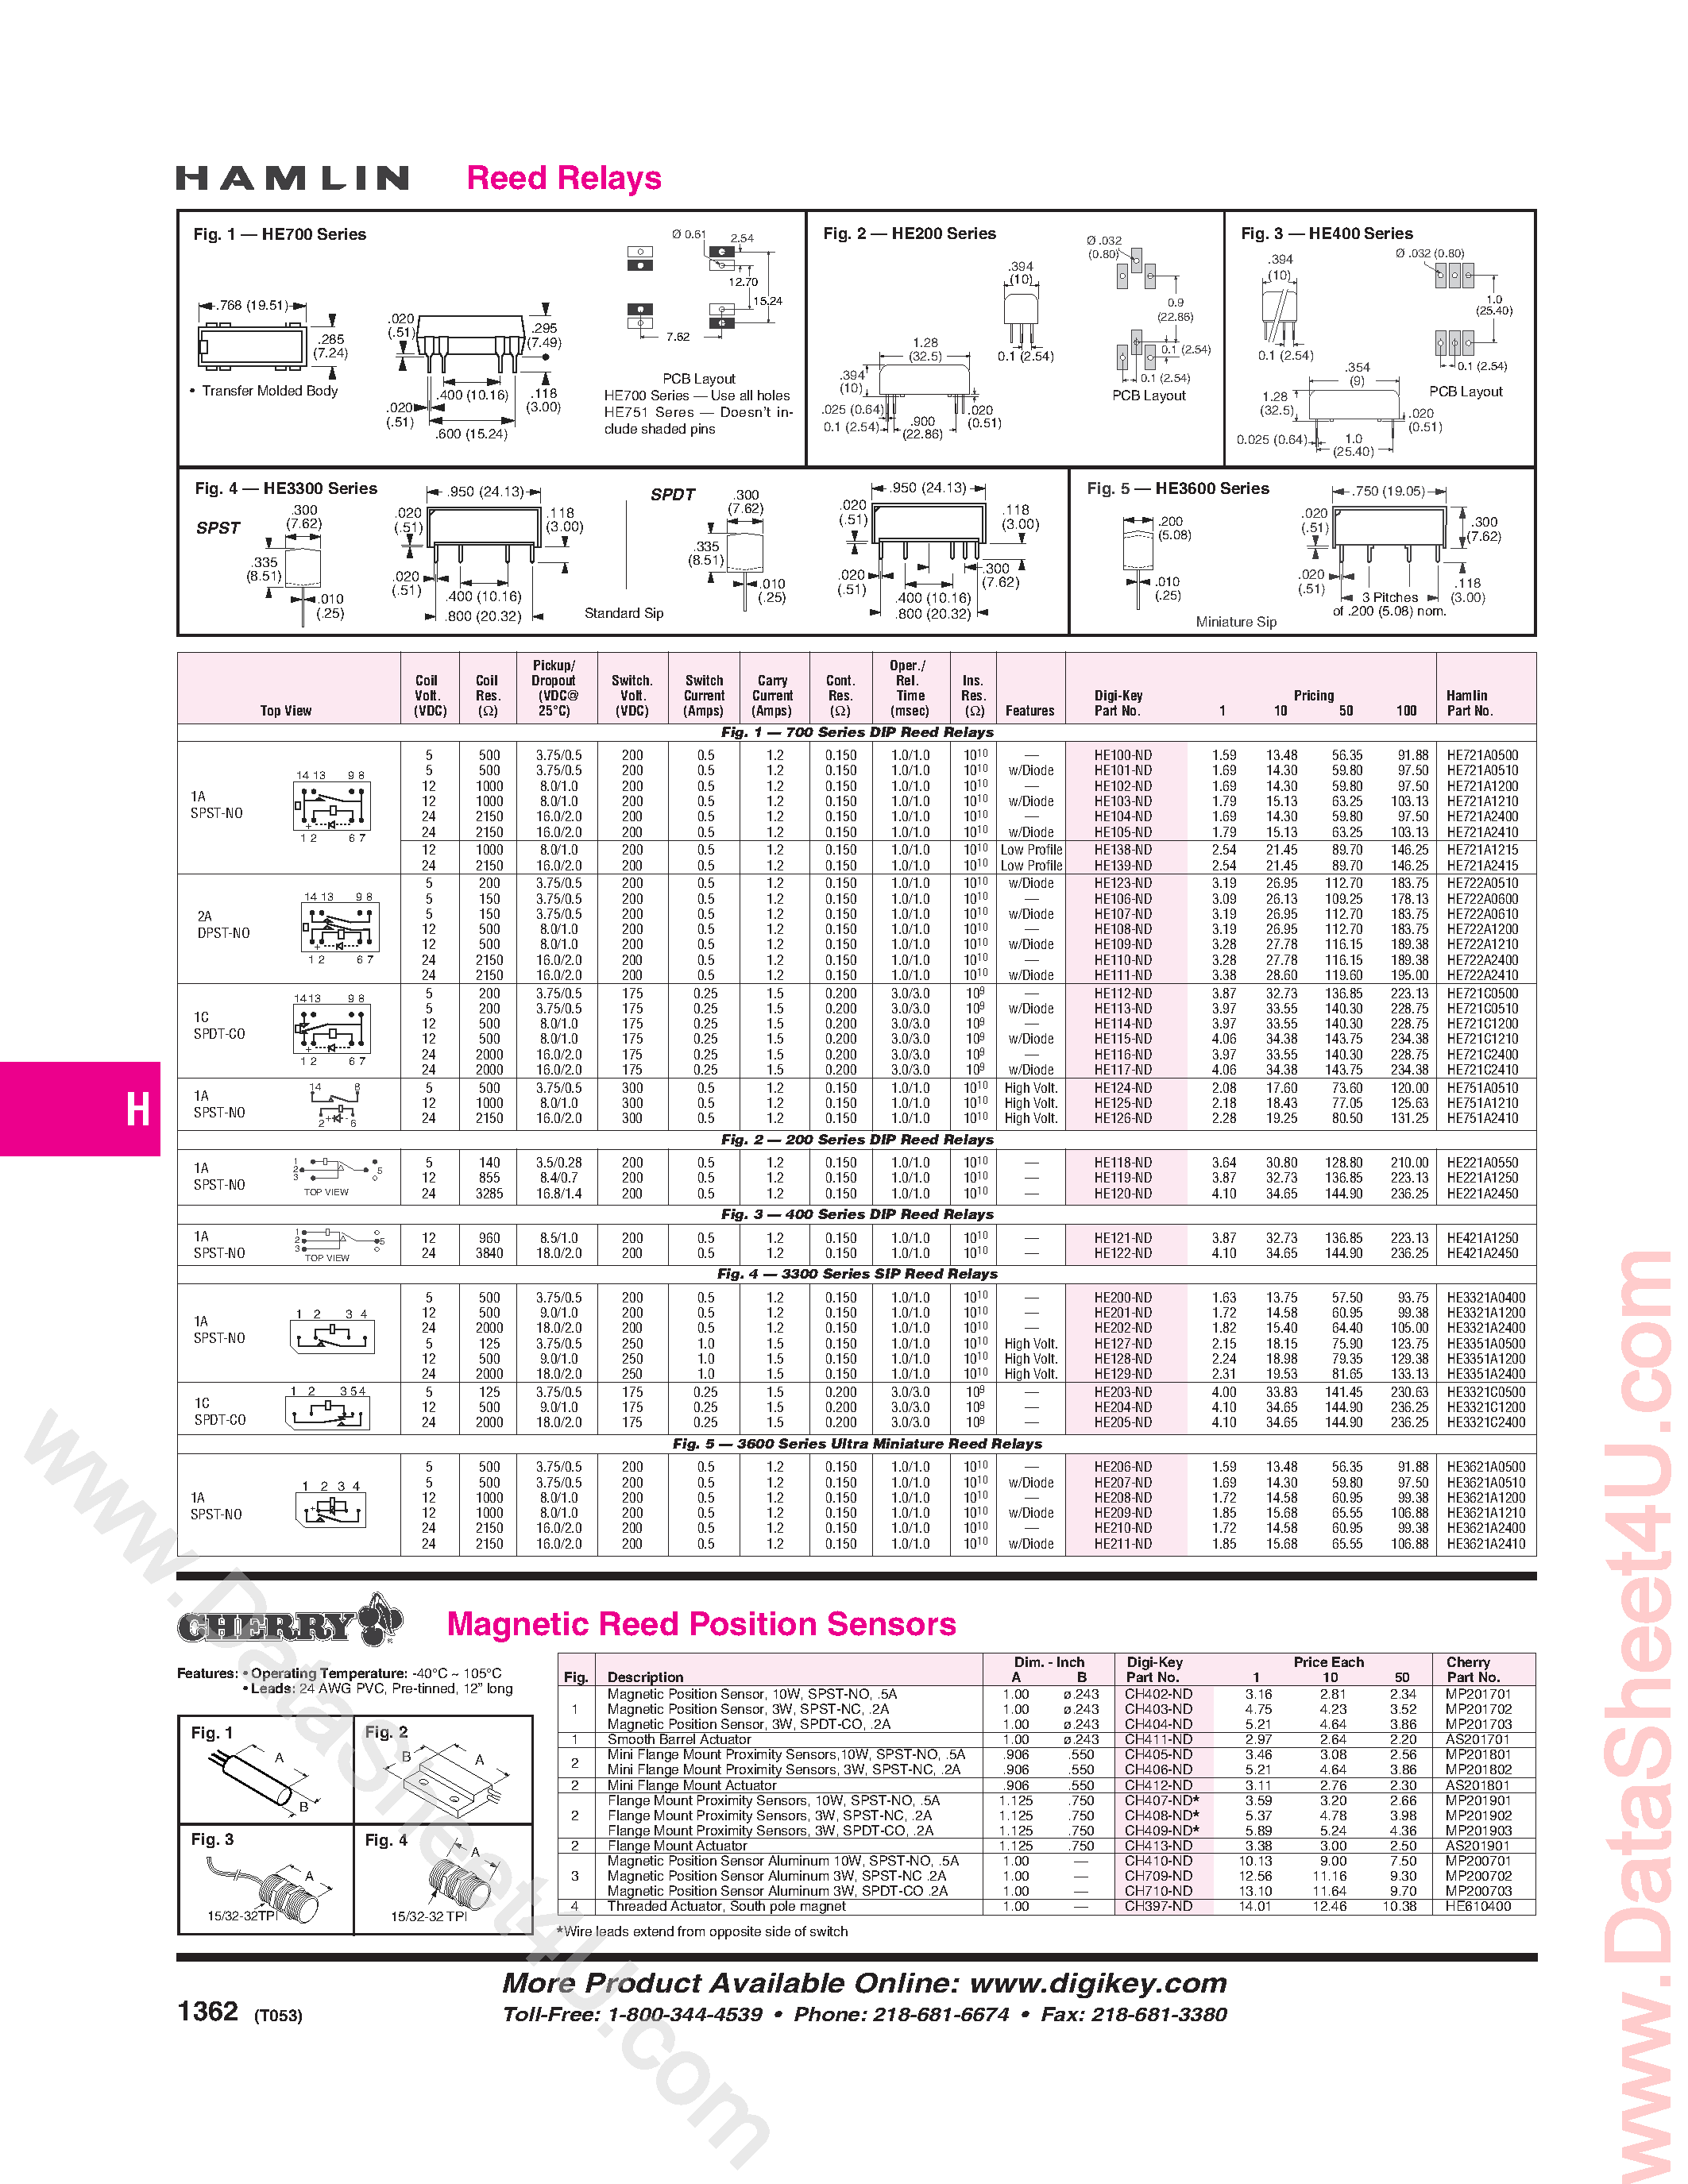 Datasheet HE3321Axxxx - (HE3600 Series) Reed Relays page 1